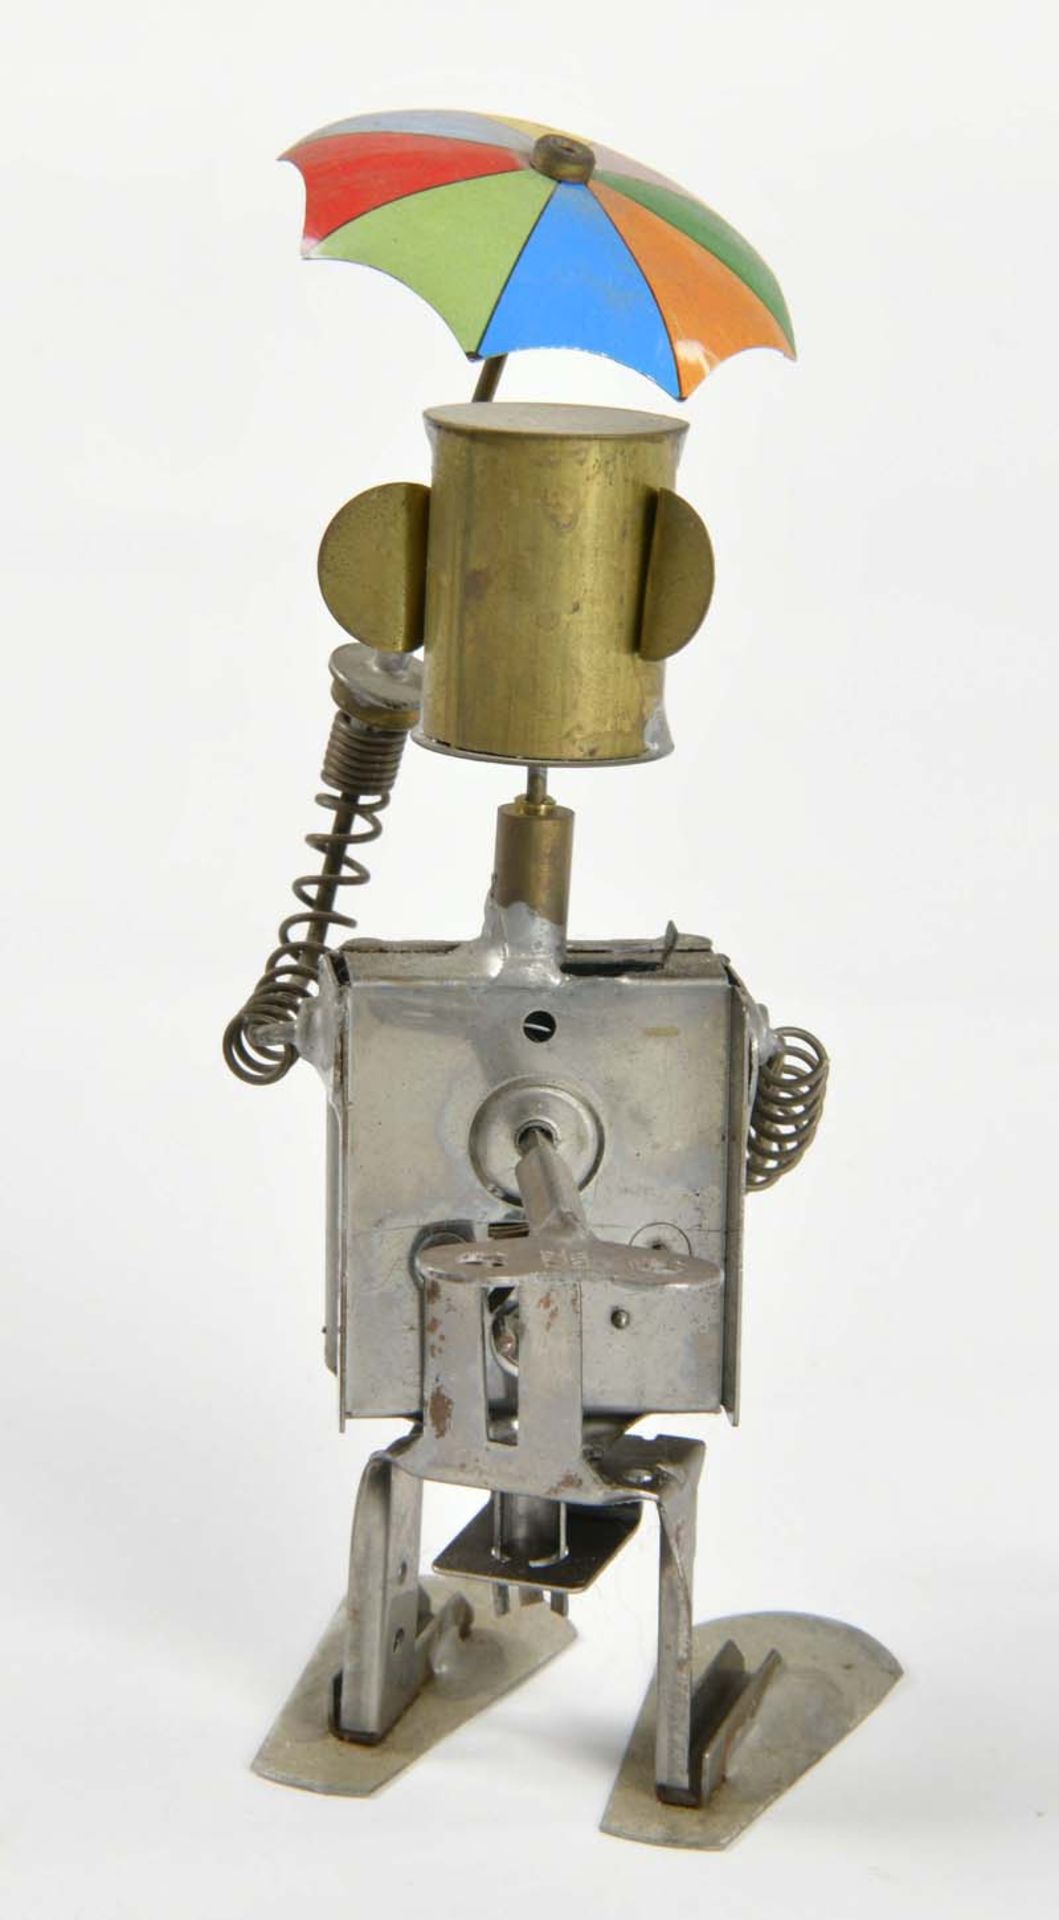 Tucher & Walther, robot, W.-Germany, 16 cm, tin, cw ok, min. paint d. - Image 2 of 2